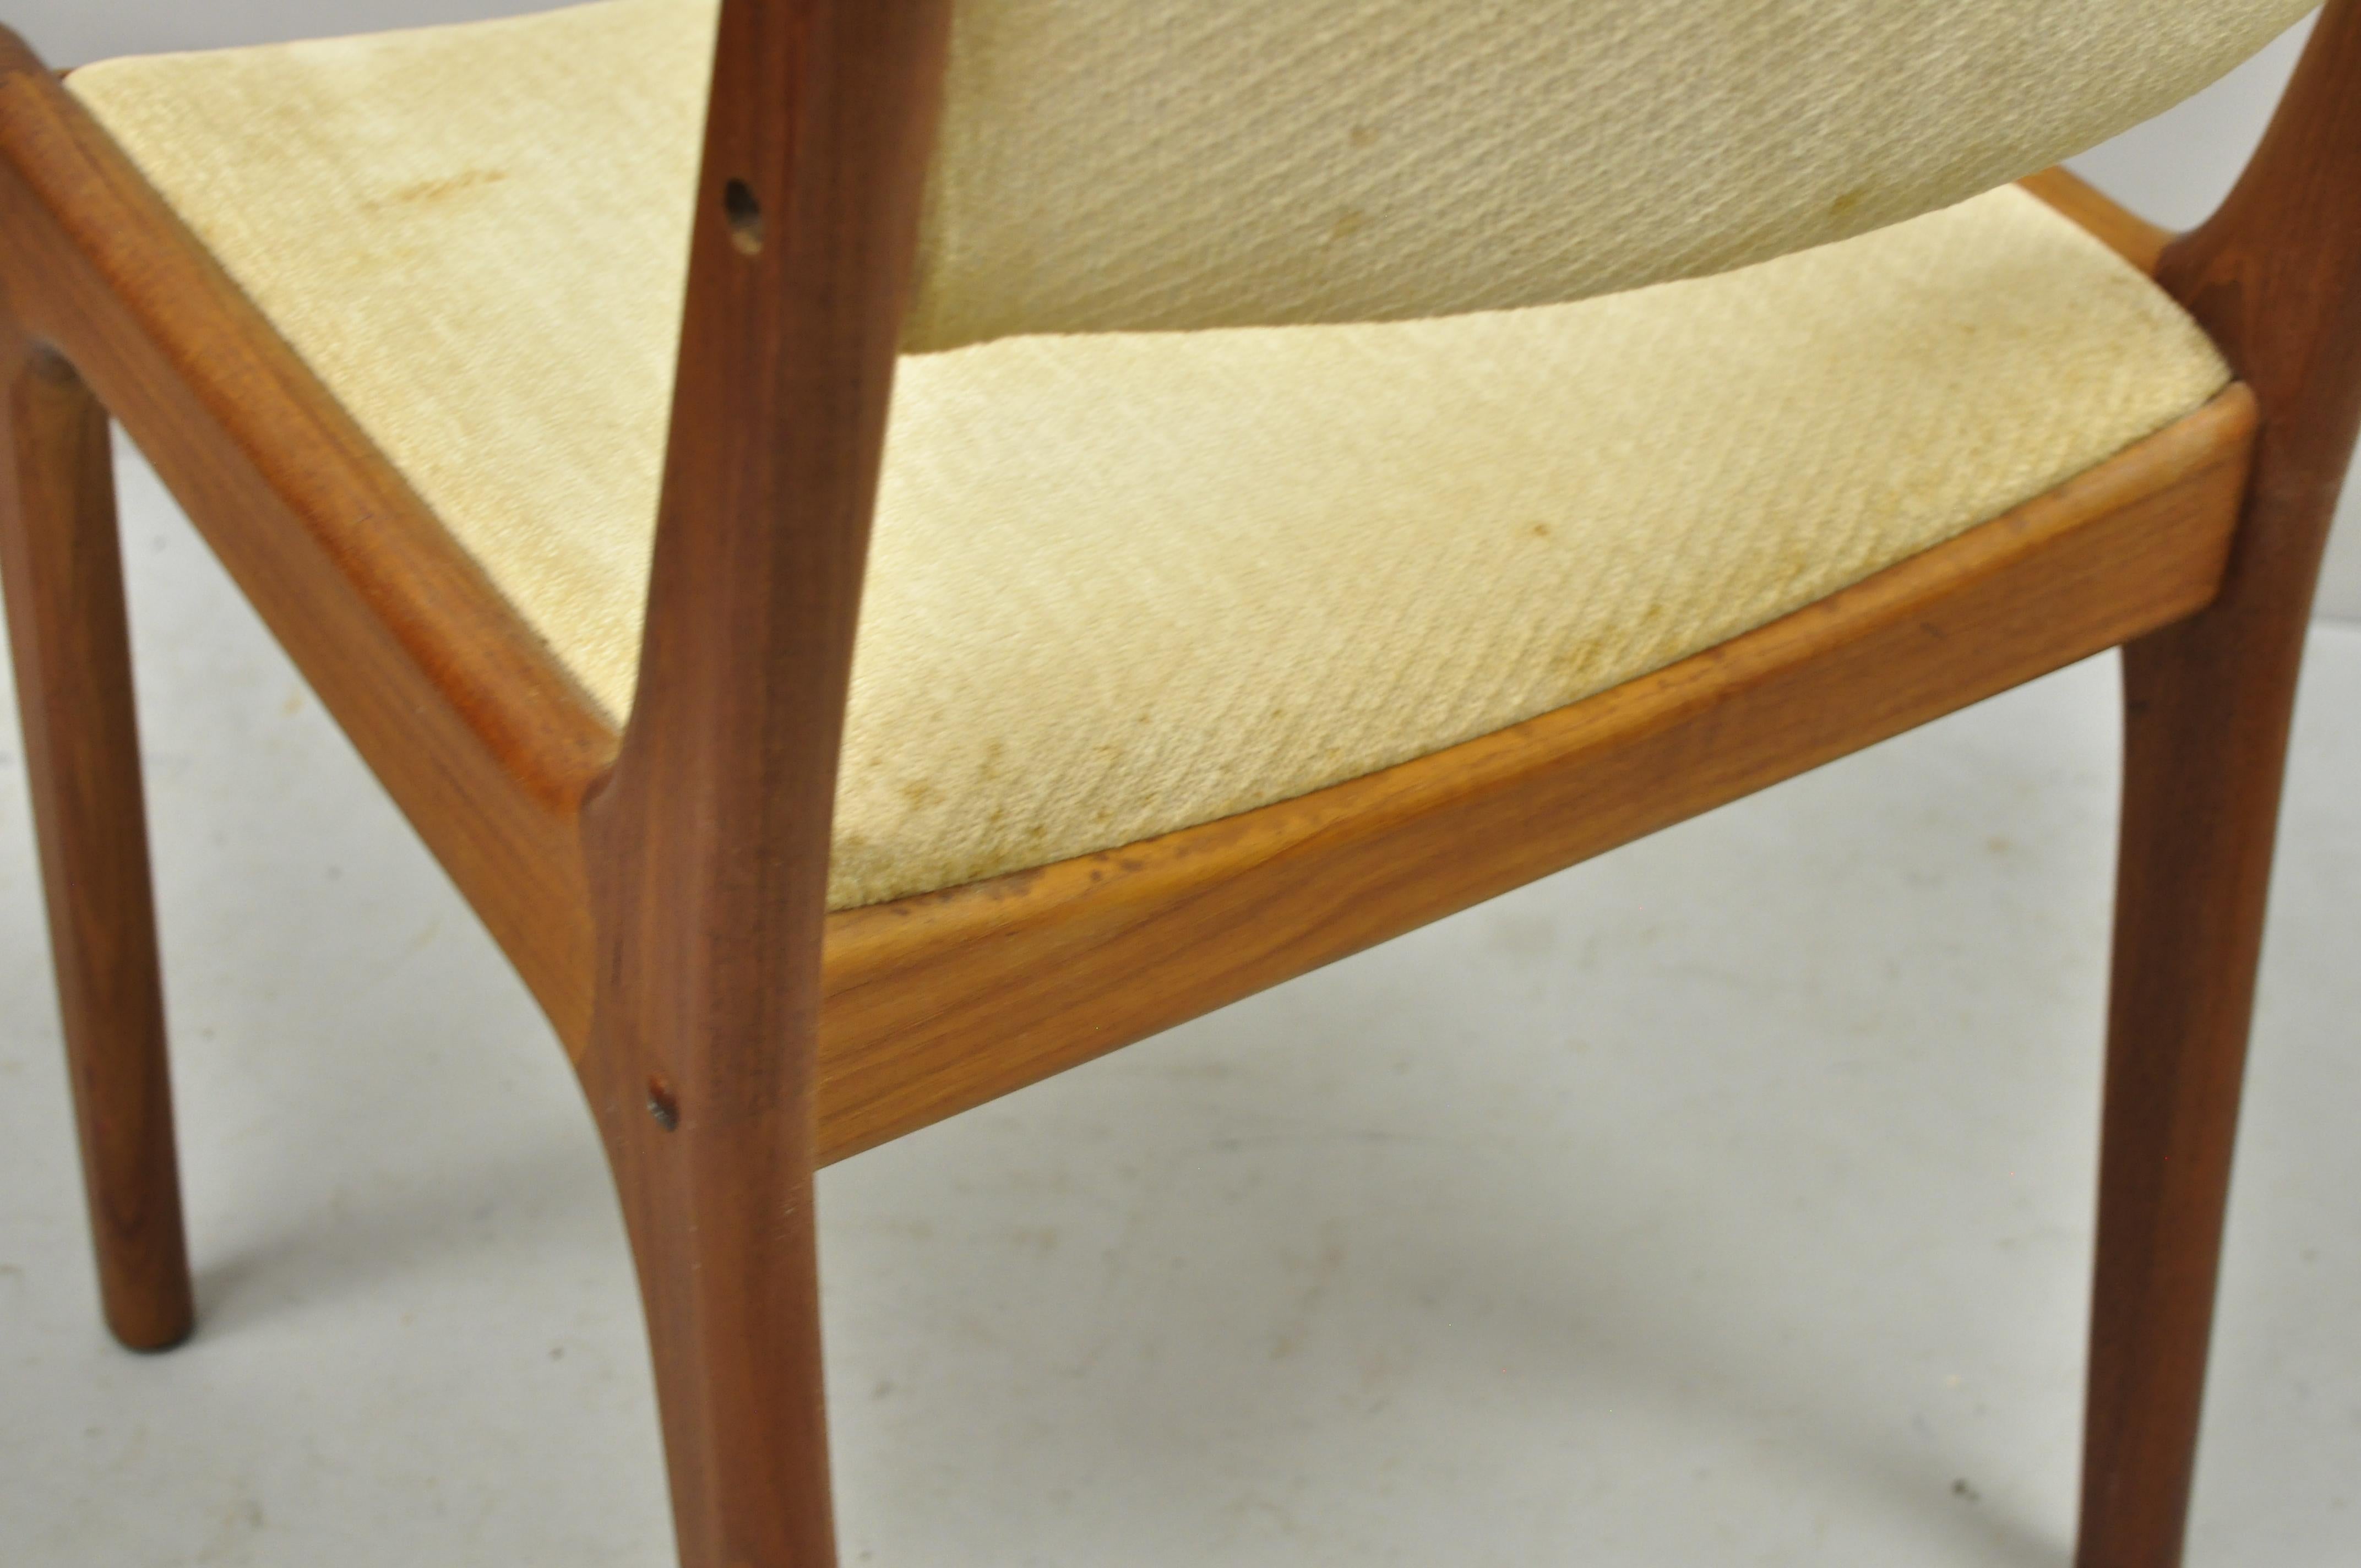 Vintage Mid-Century Modern Danish Style Teak Wood Dining Chair by Sun Furniture For Sale 1